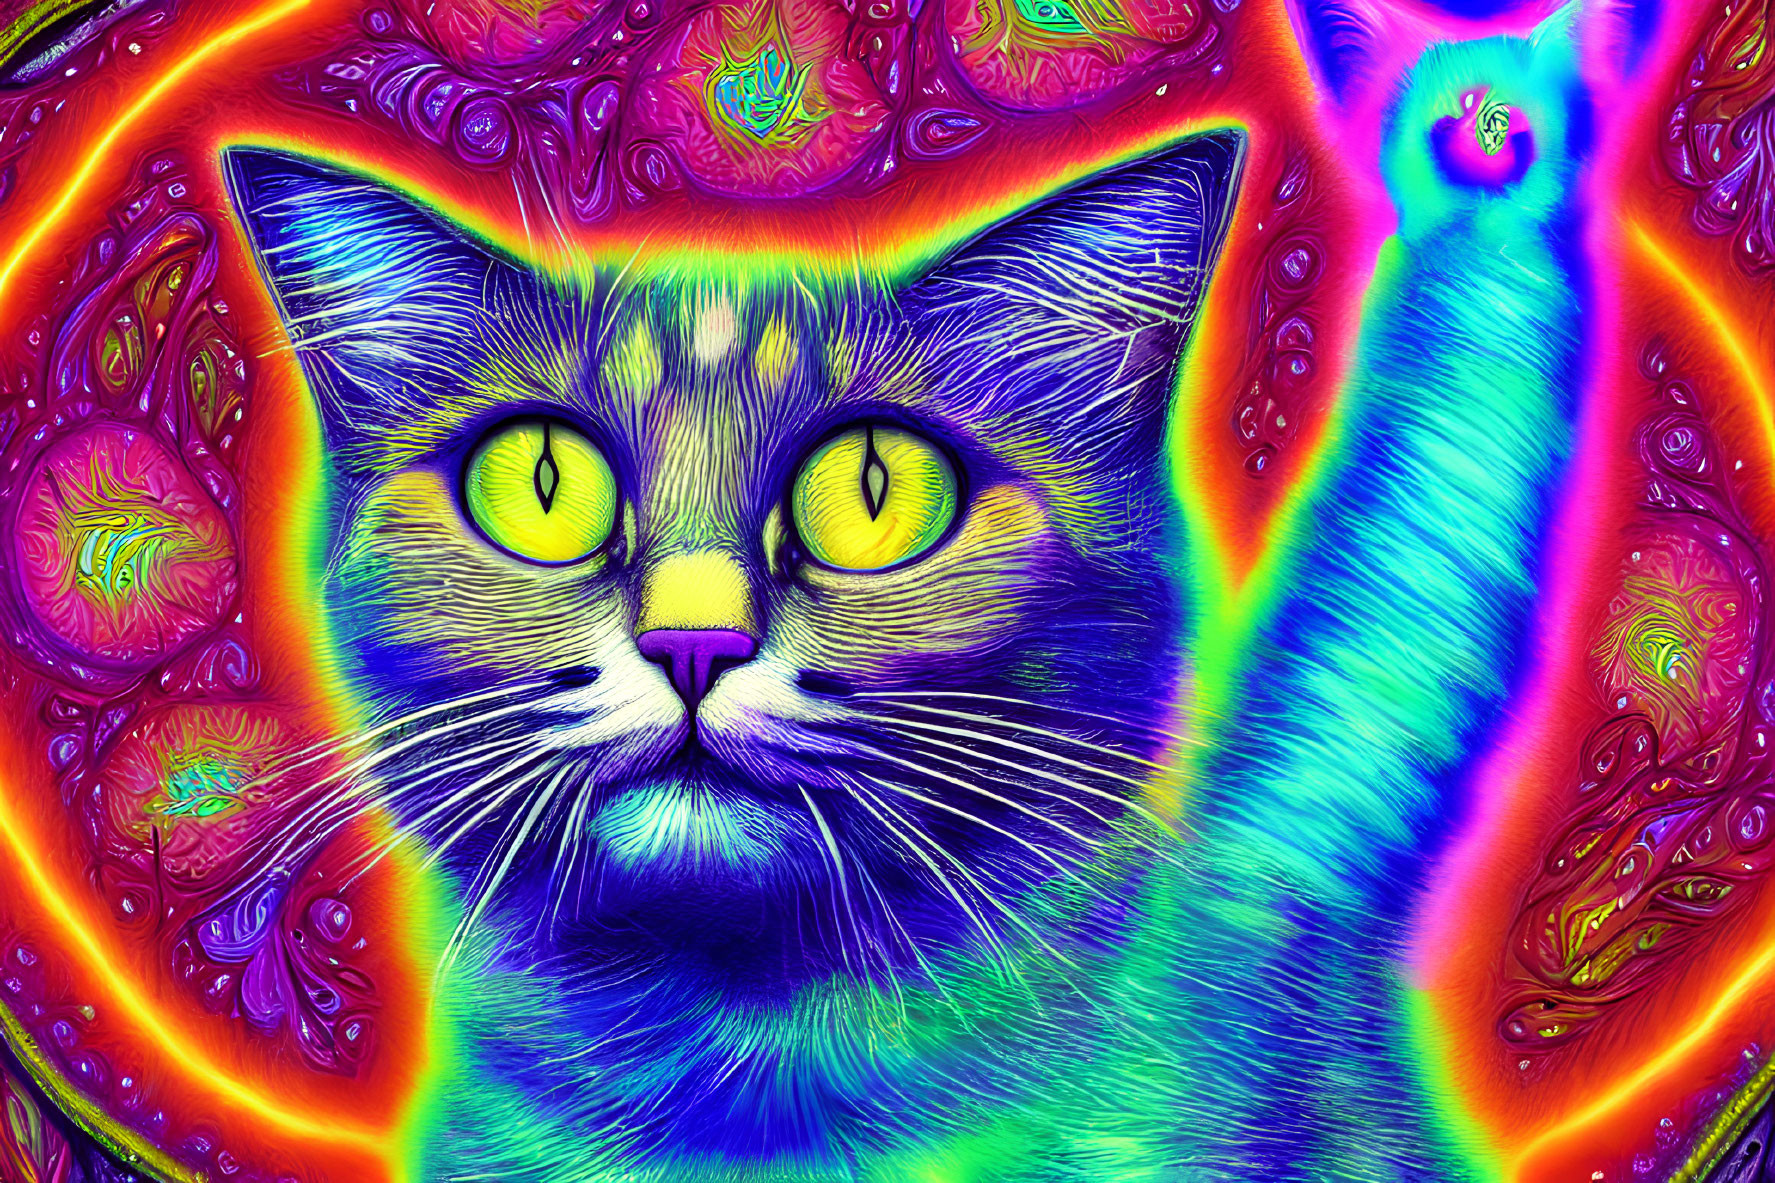 Colorful Psychedelic Cat Art with Swirling Patterns